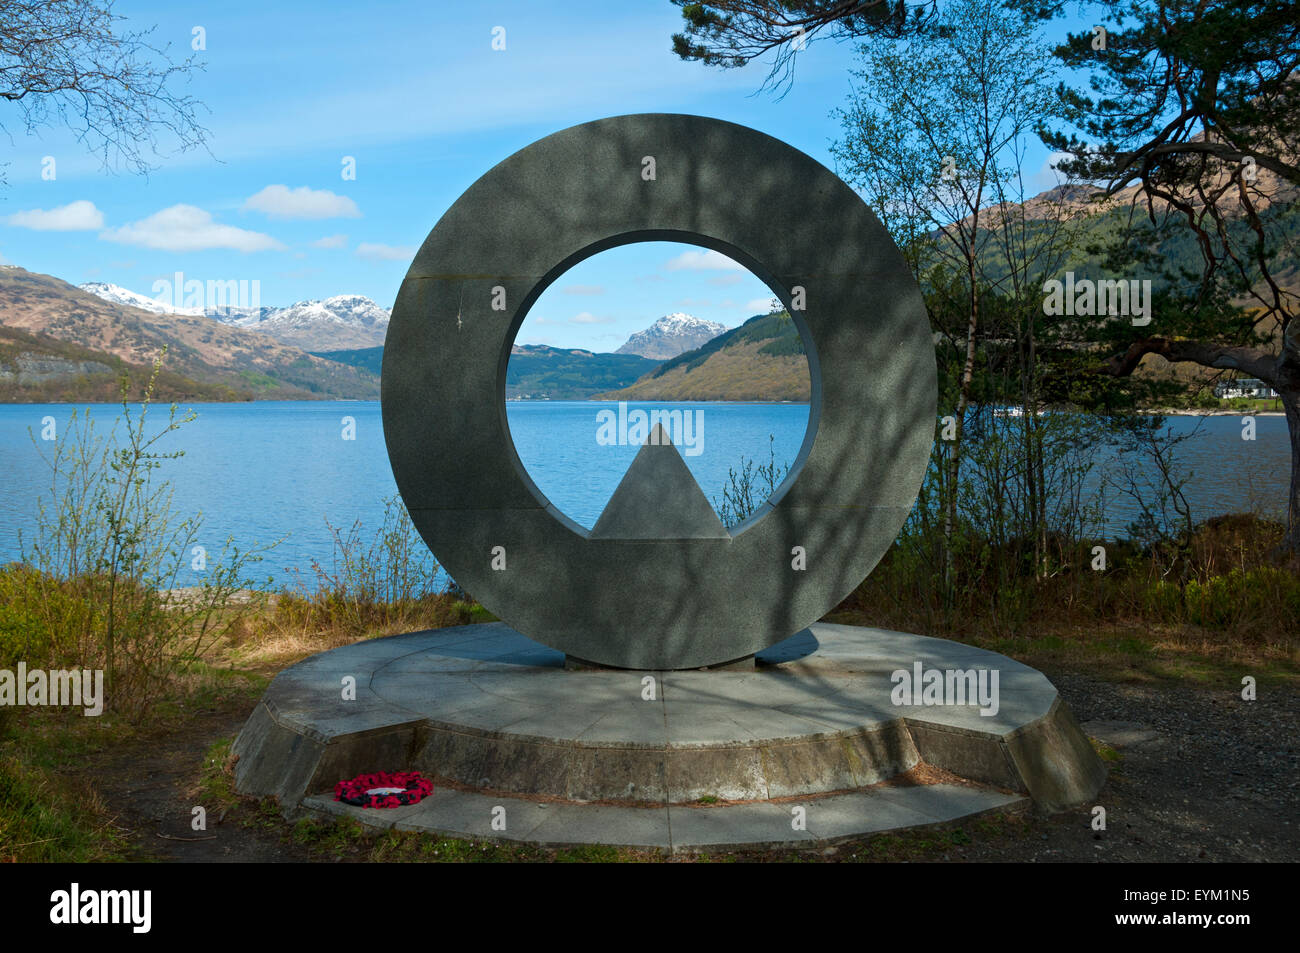 The Rowardennan War Memorial sculpture, by Doug Cocker.  By the side of Loch Lomond at Rowardennan, Stirlingshire, Scotland, UK Stock Photo